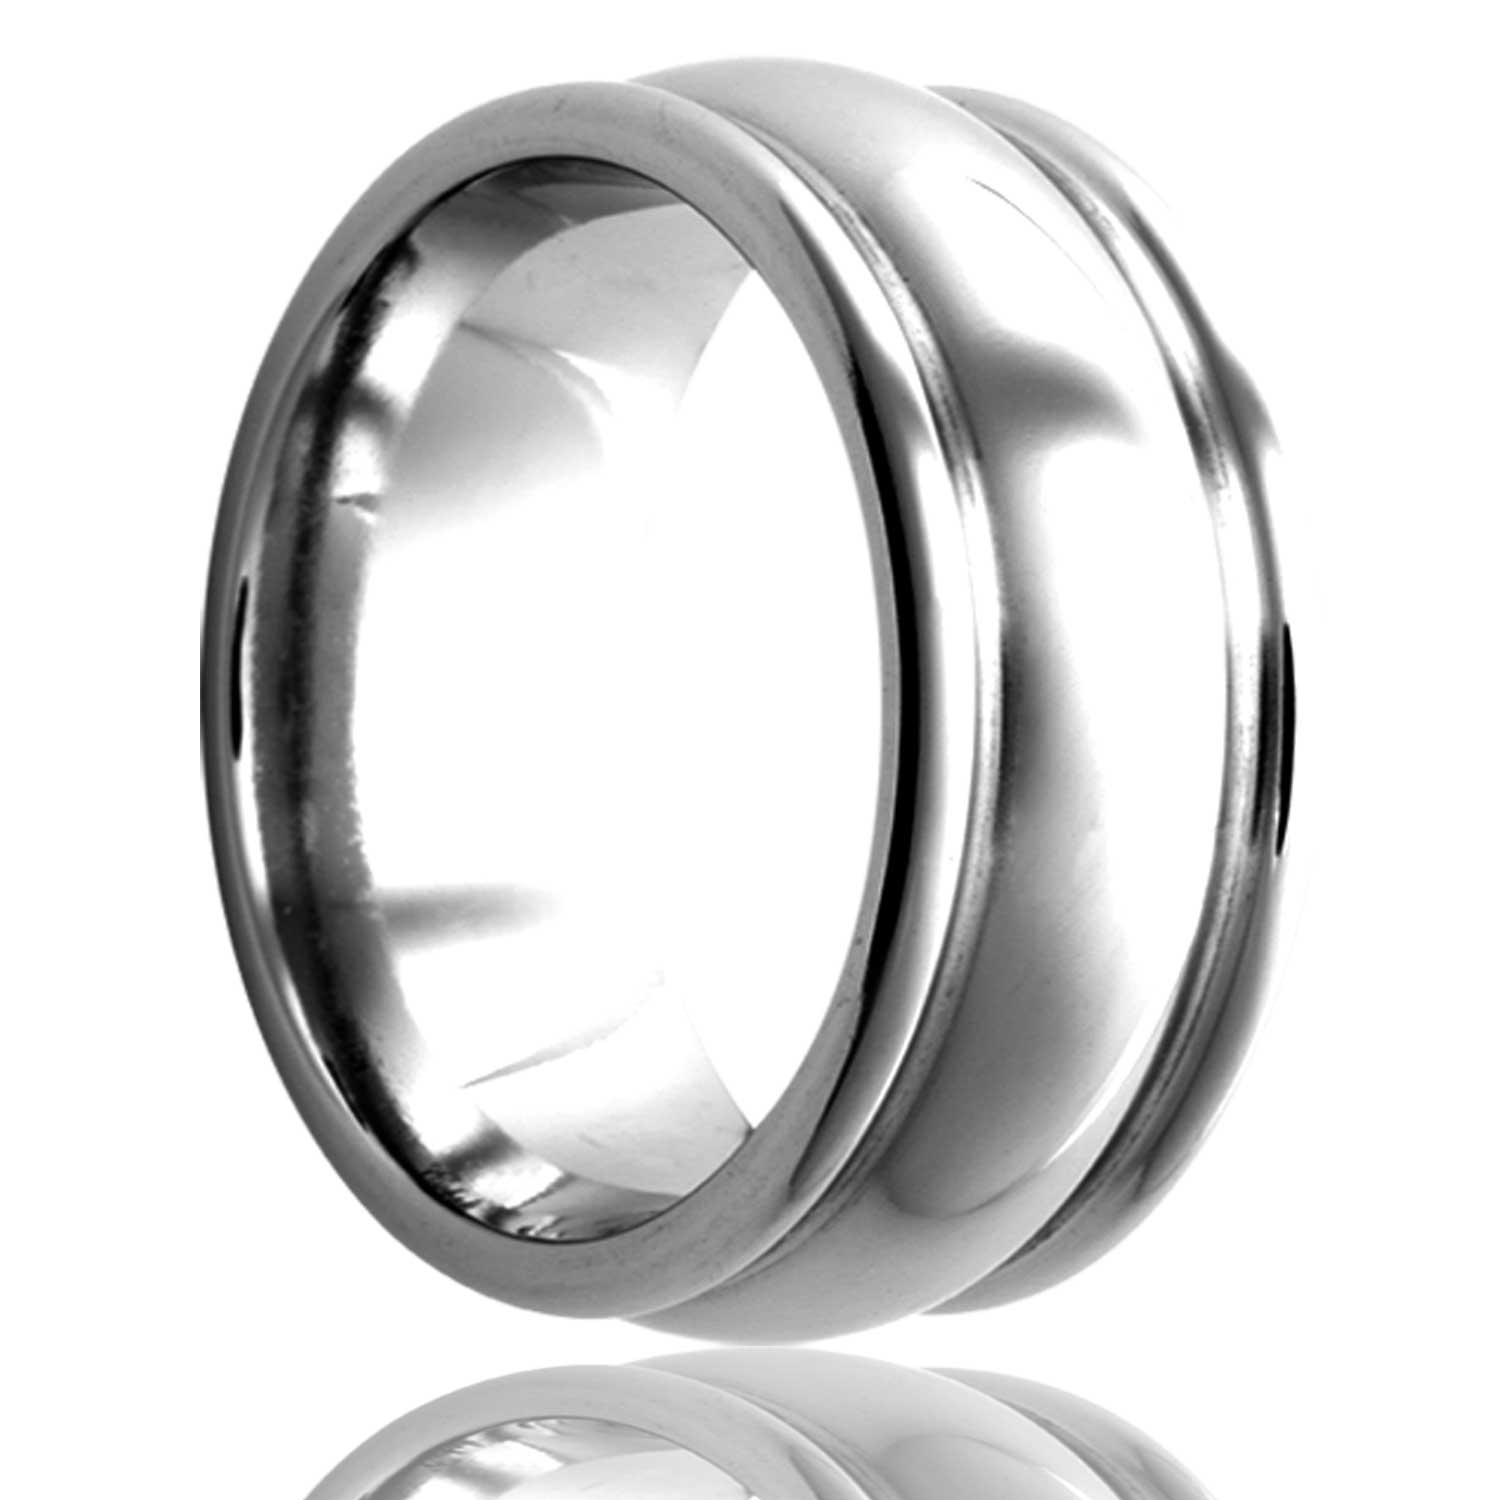 A domed cobalt wedding band with grooved & stepped edges displayed on a neutral white background.